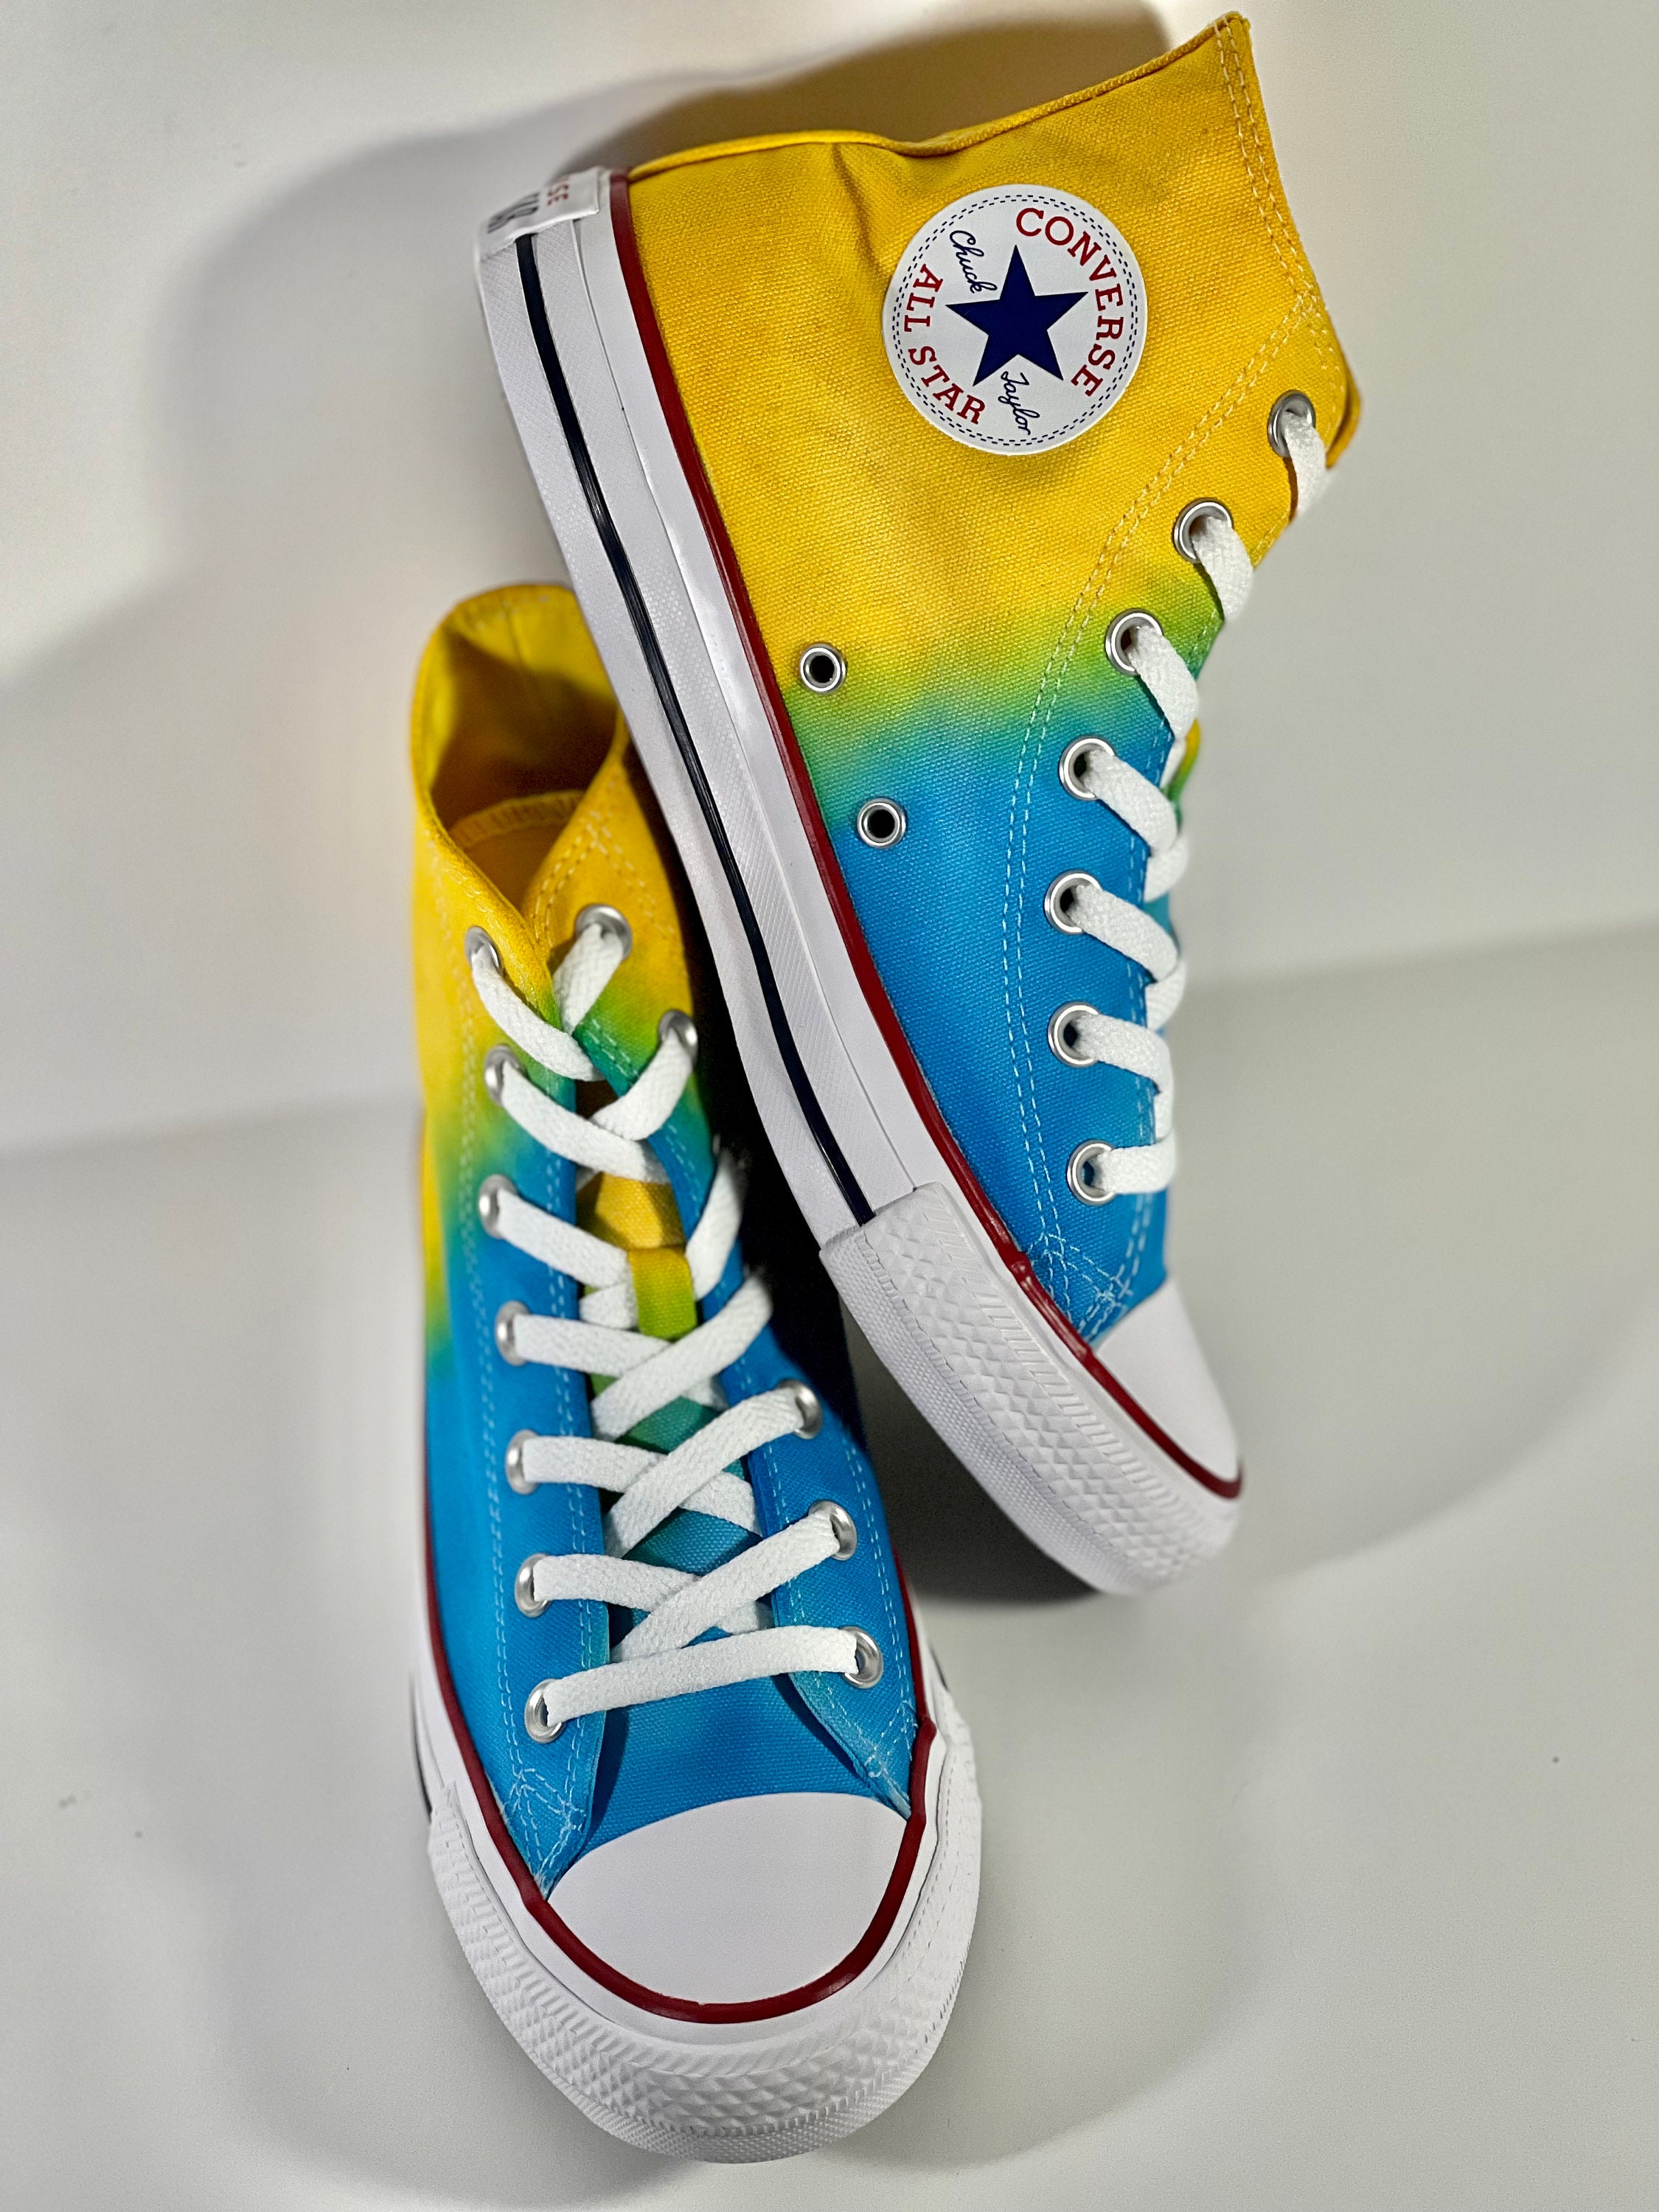 Himmel rygte Vag Royal Blue and Yellow Gold Converse All Star High Tops Shoes - Etsy